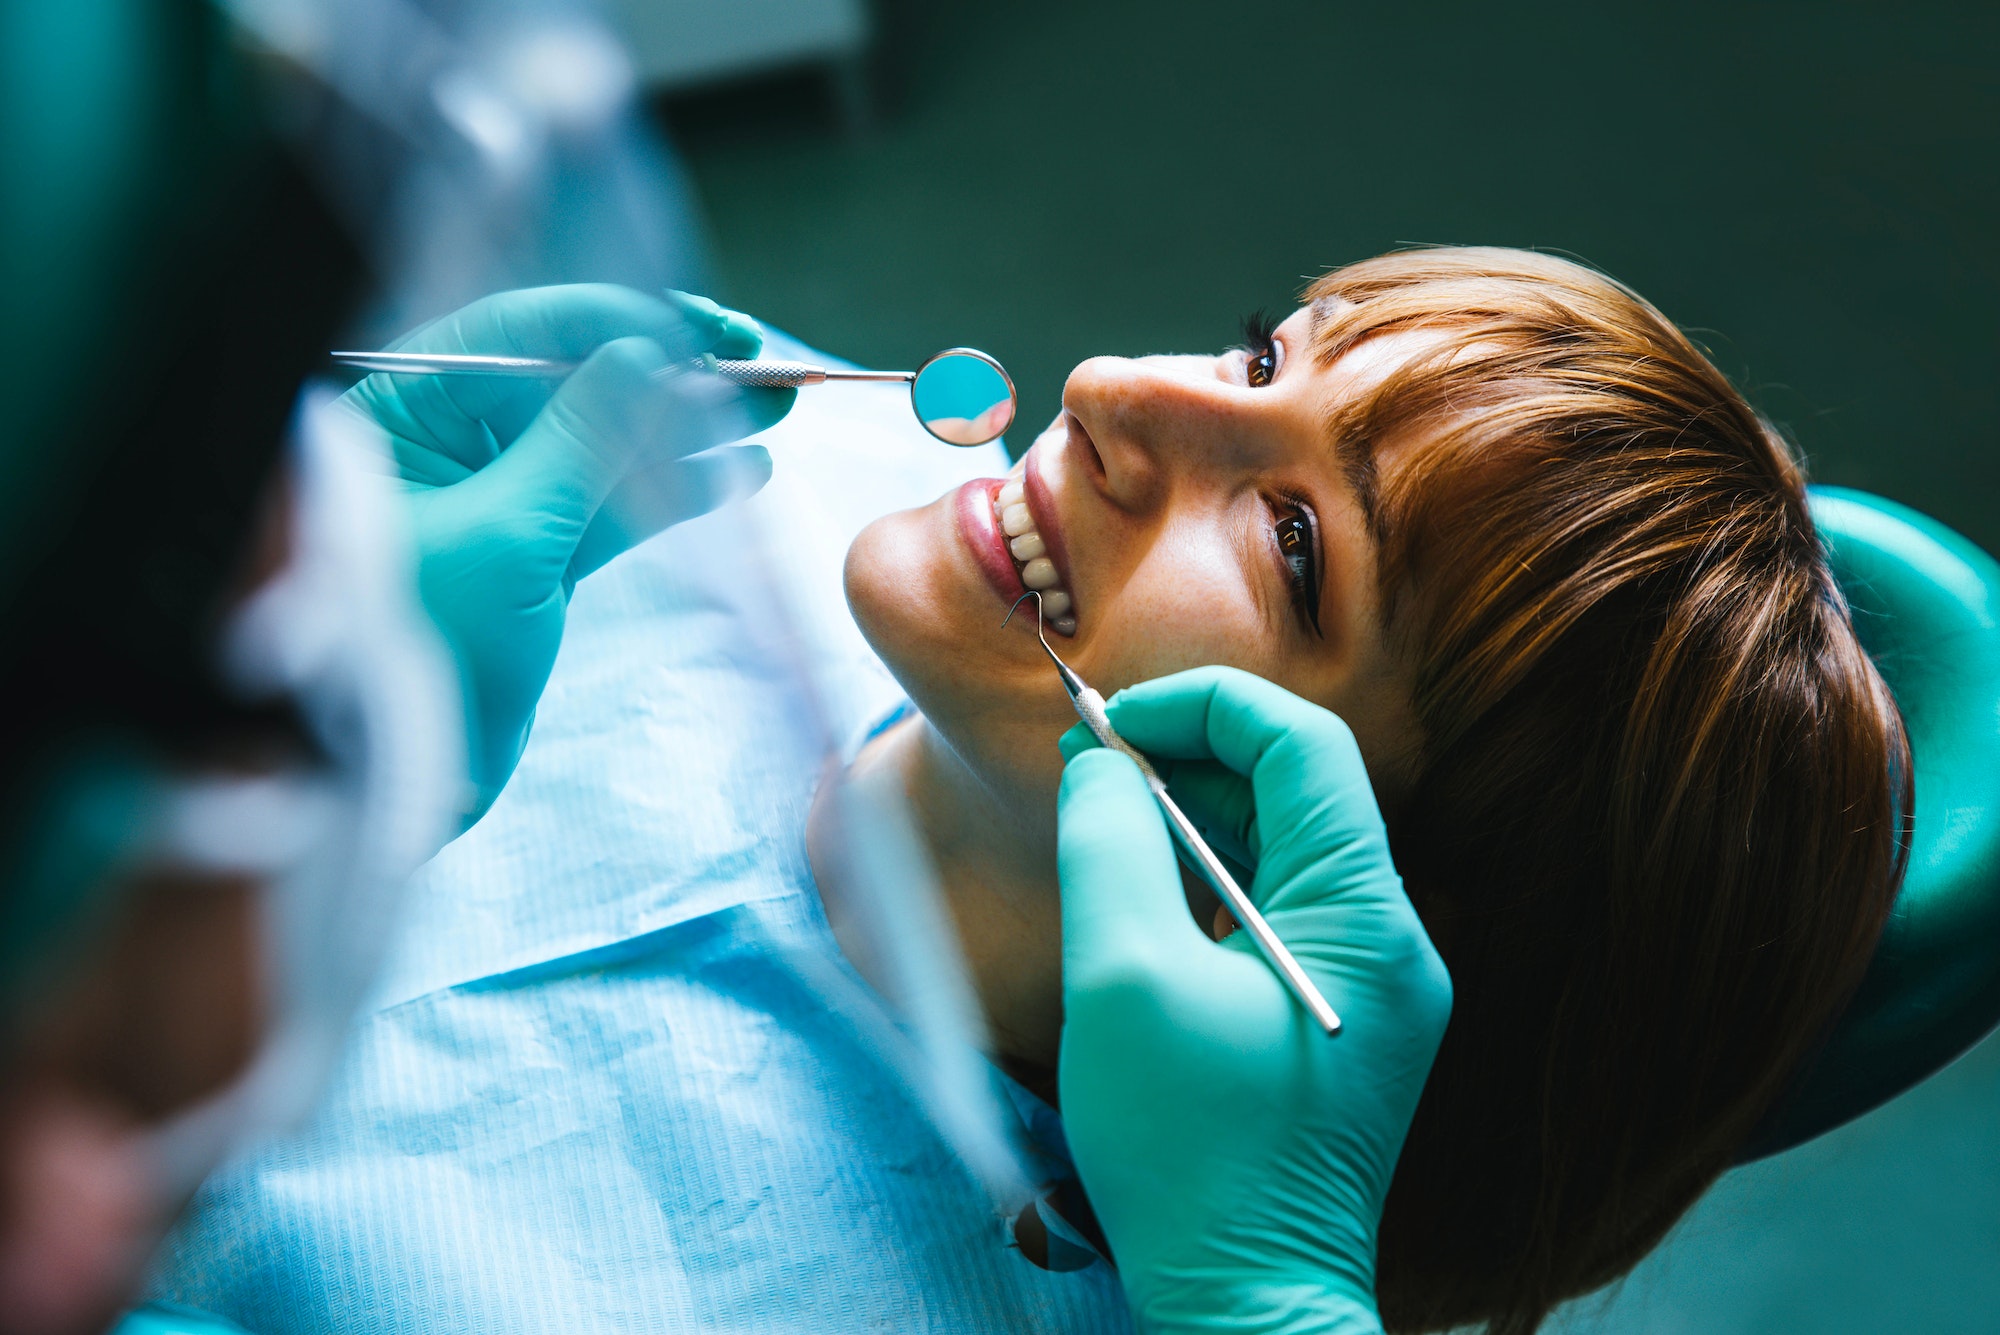 Smiling woman mouth under treatment at dental clinic - Oral healthcare concept